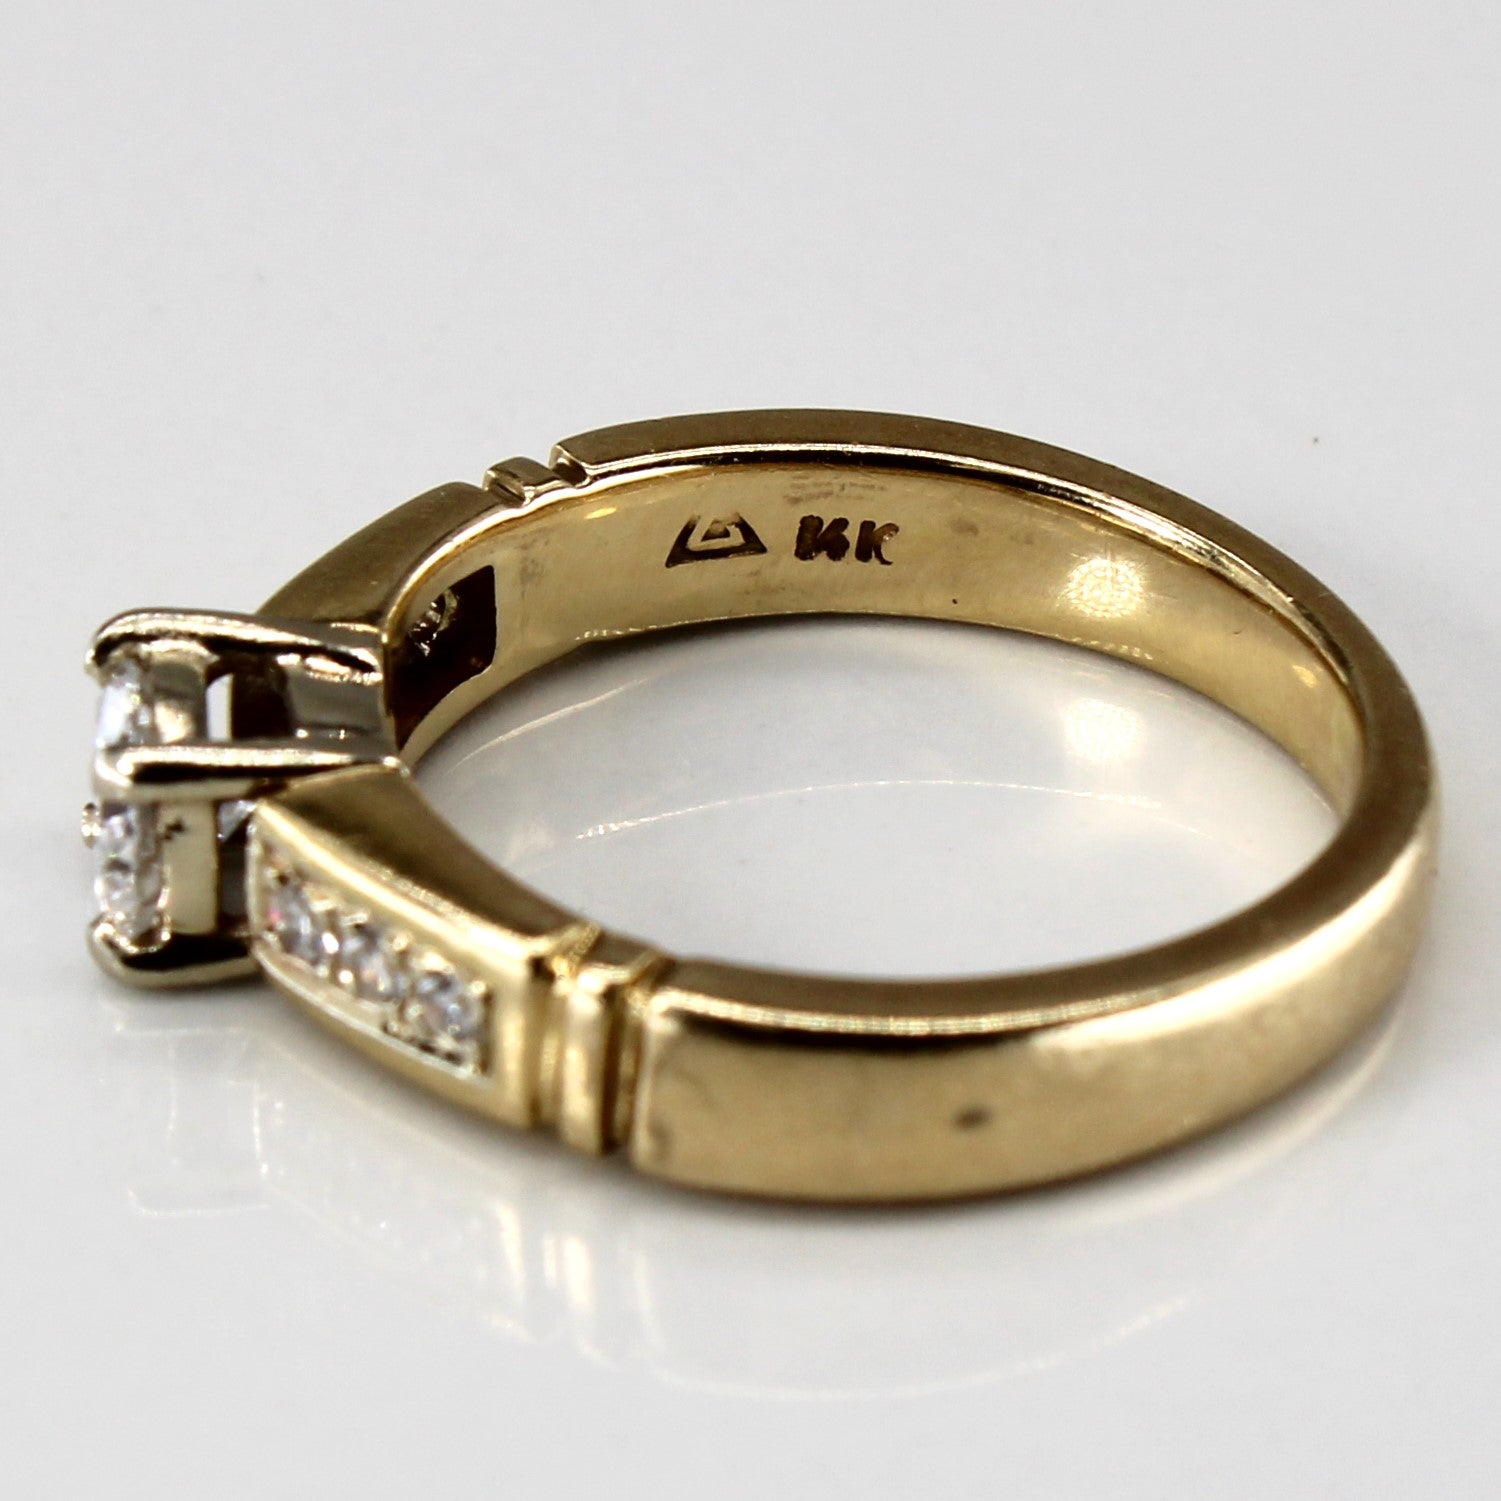 Birks Solitaire with Accents Diamond 14k Ring | 0.54ctw | SZ 5.75 |